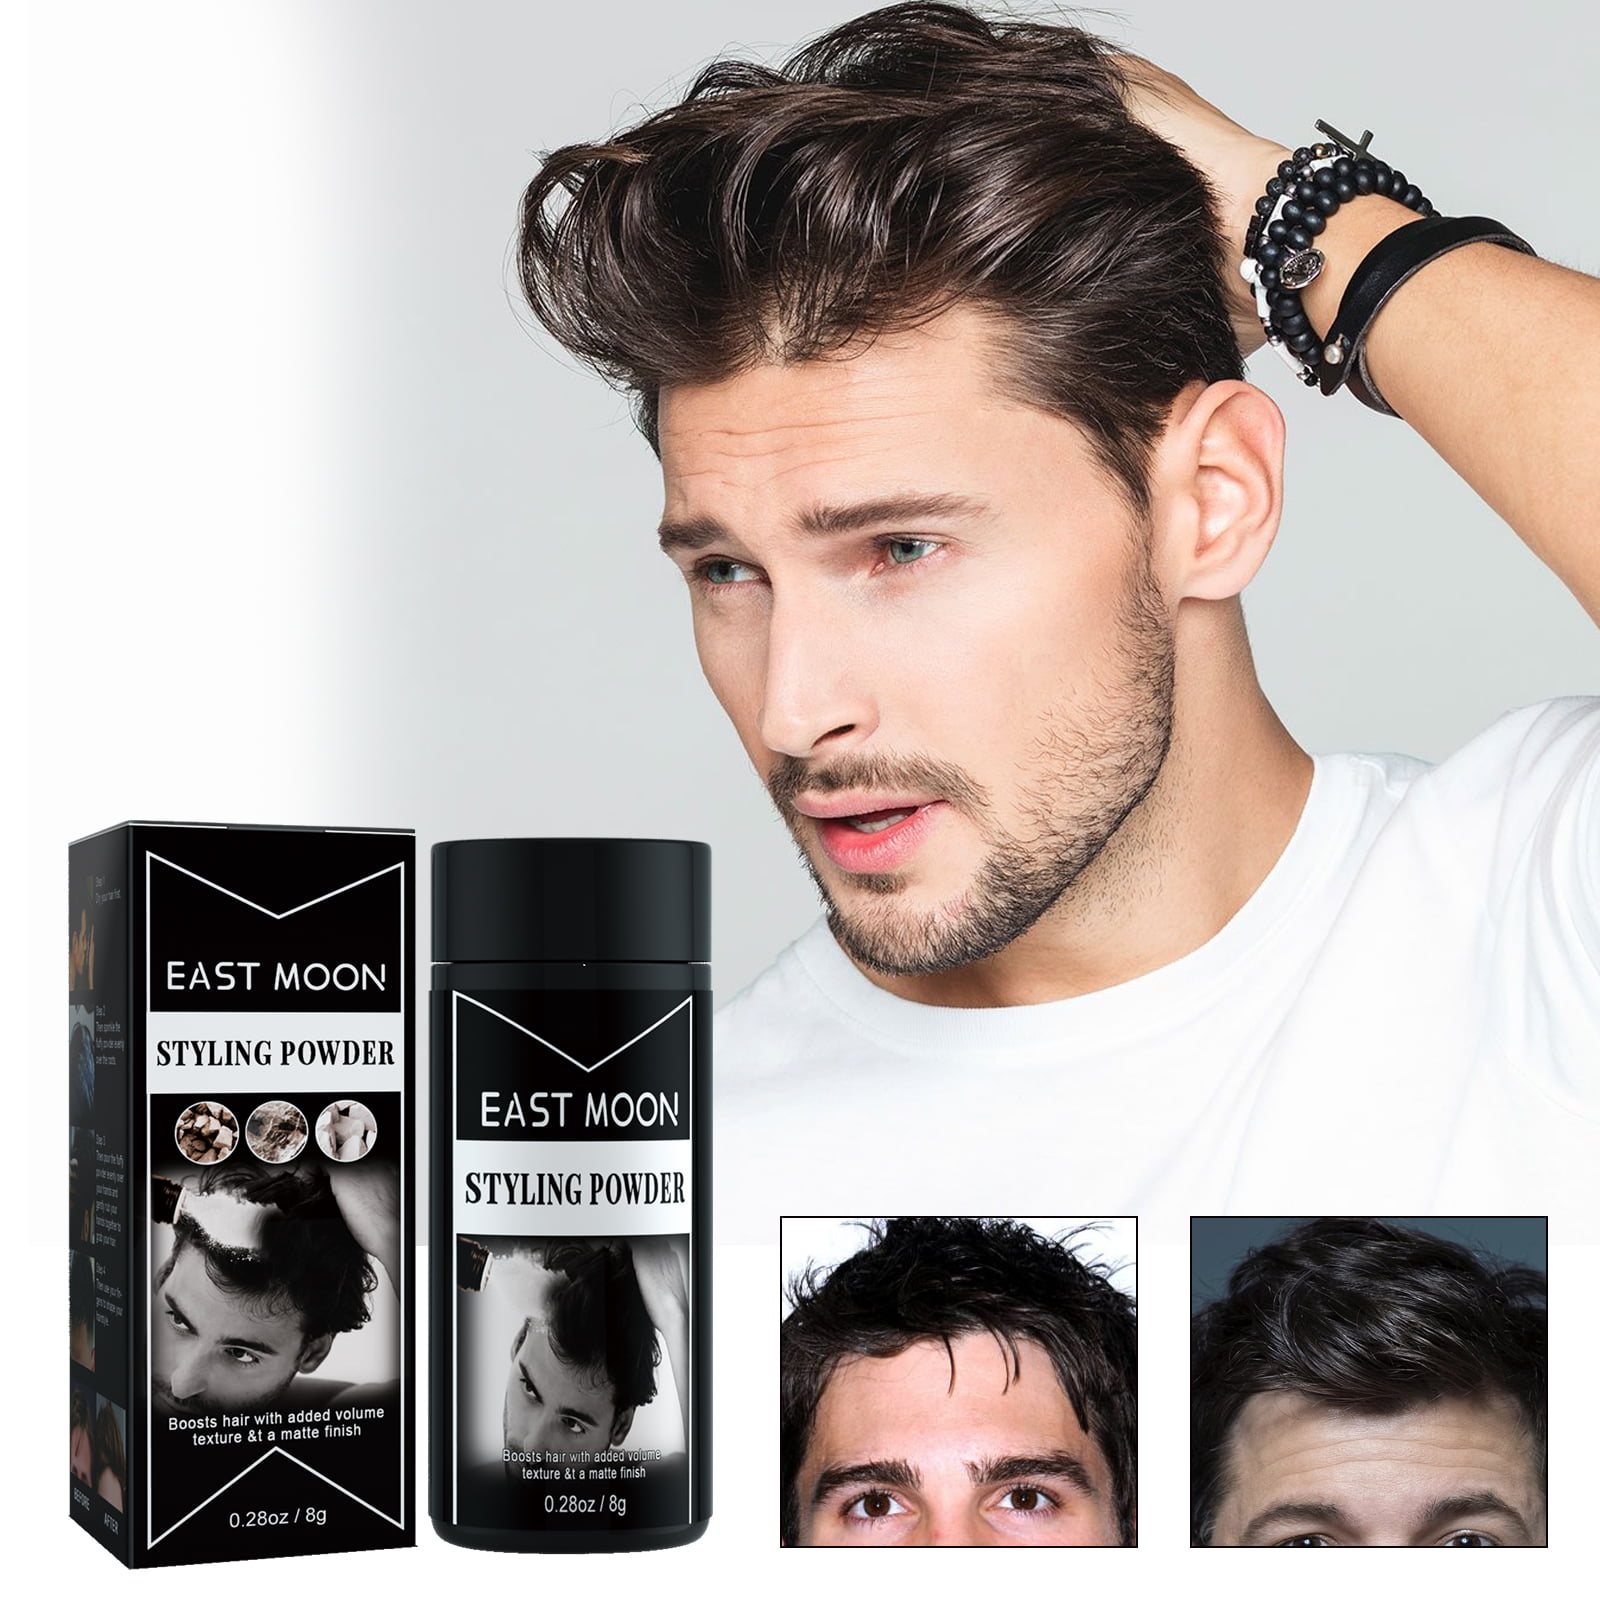 Texture Powder Hair for Men - Texturizing & Mattifying Hair Powder for Men  - Grooming, Volumizing & Hair Styling Products for Extra Volume -8g -  